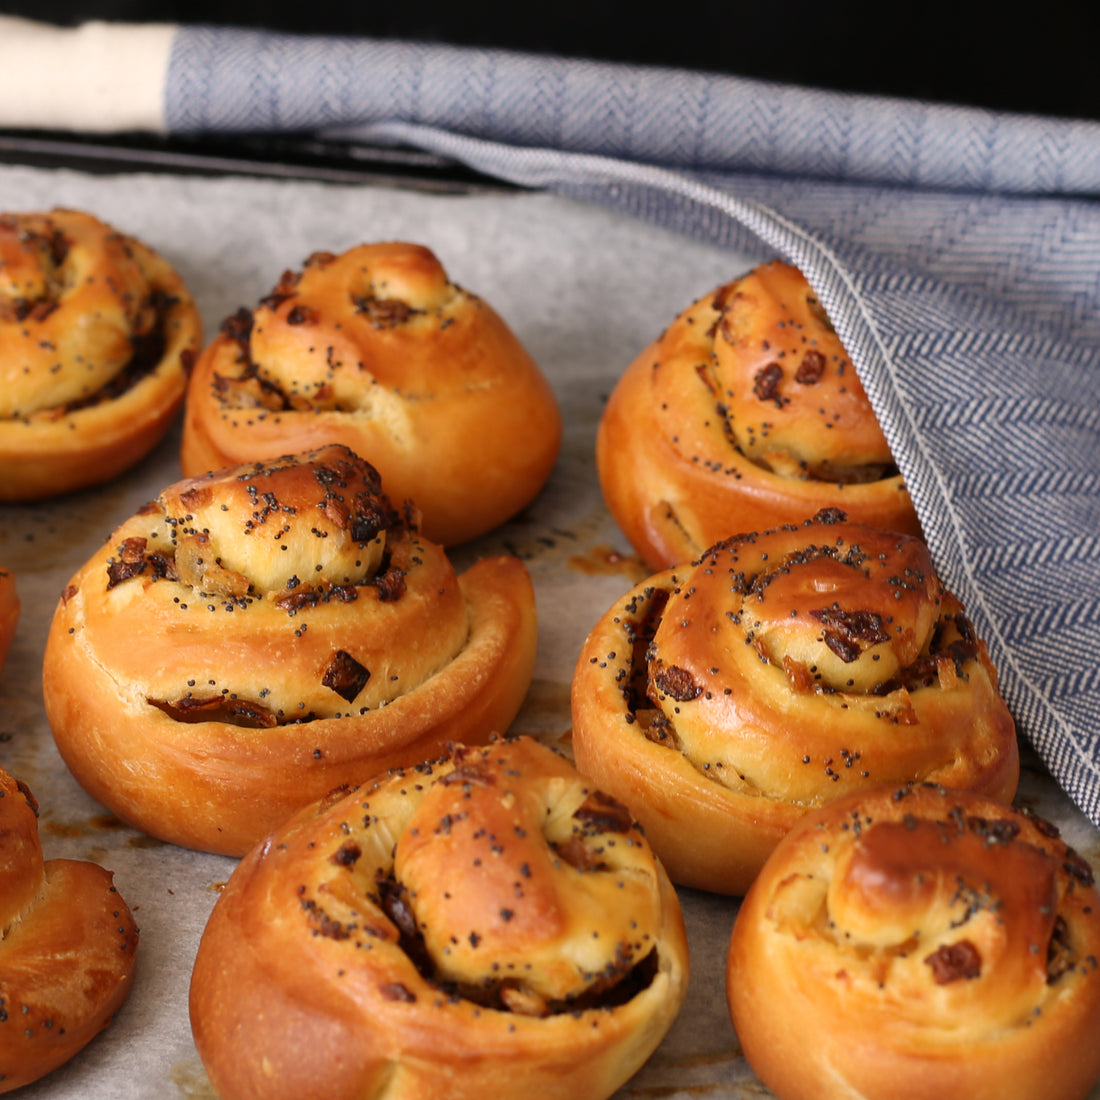 Bialy Buns - Savory Pastry